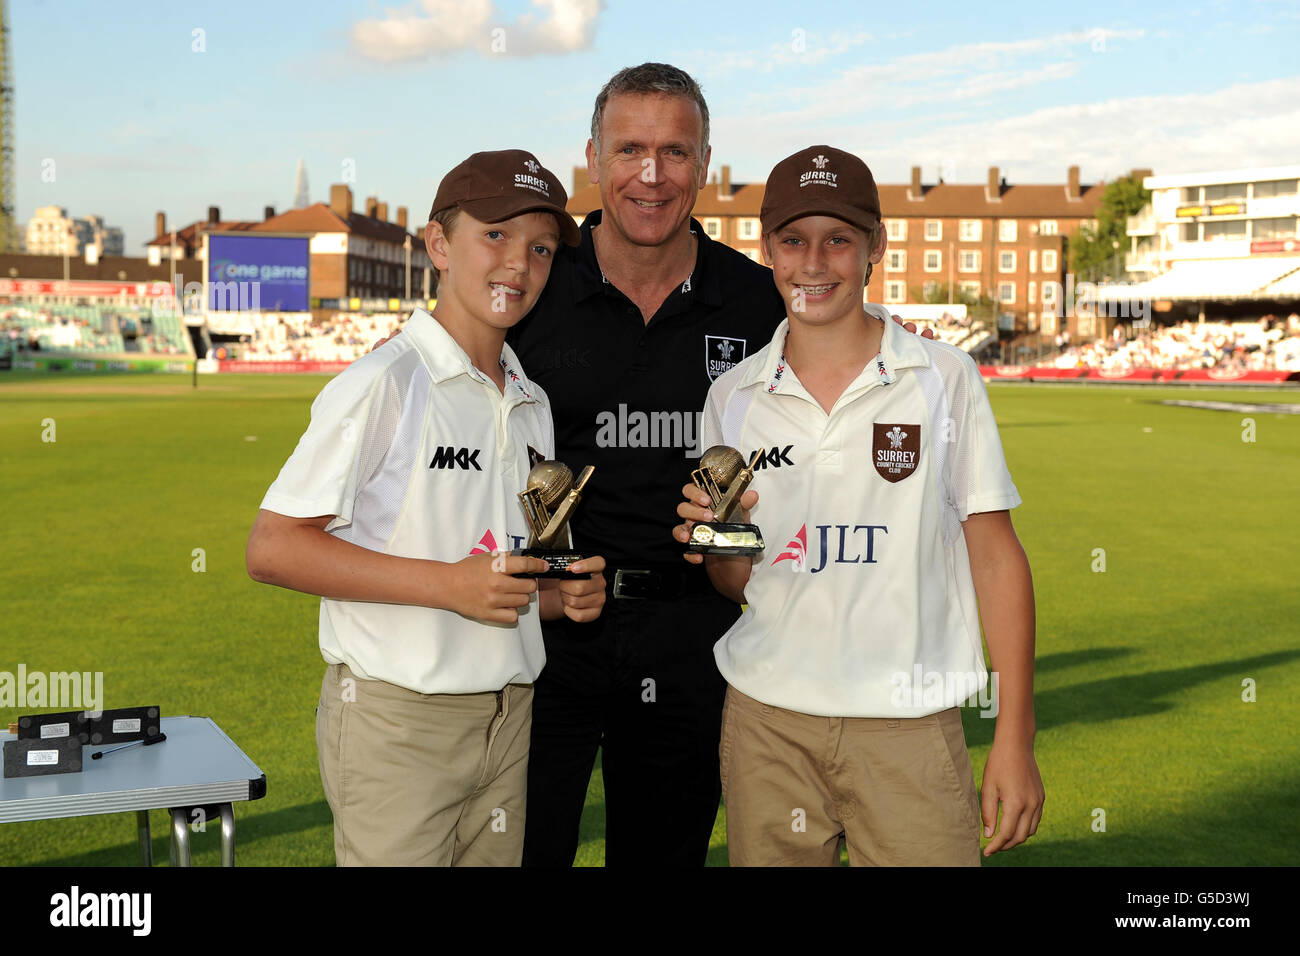 Cricket - Clydesdale Bank 40 - Group B - Surrey v Glamorgan - The Kia Oval. Alec Stewart presents the Under 13 County Age Group Player of the Year Award to Will Jacks and Ben Holder Stock Photo